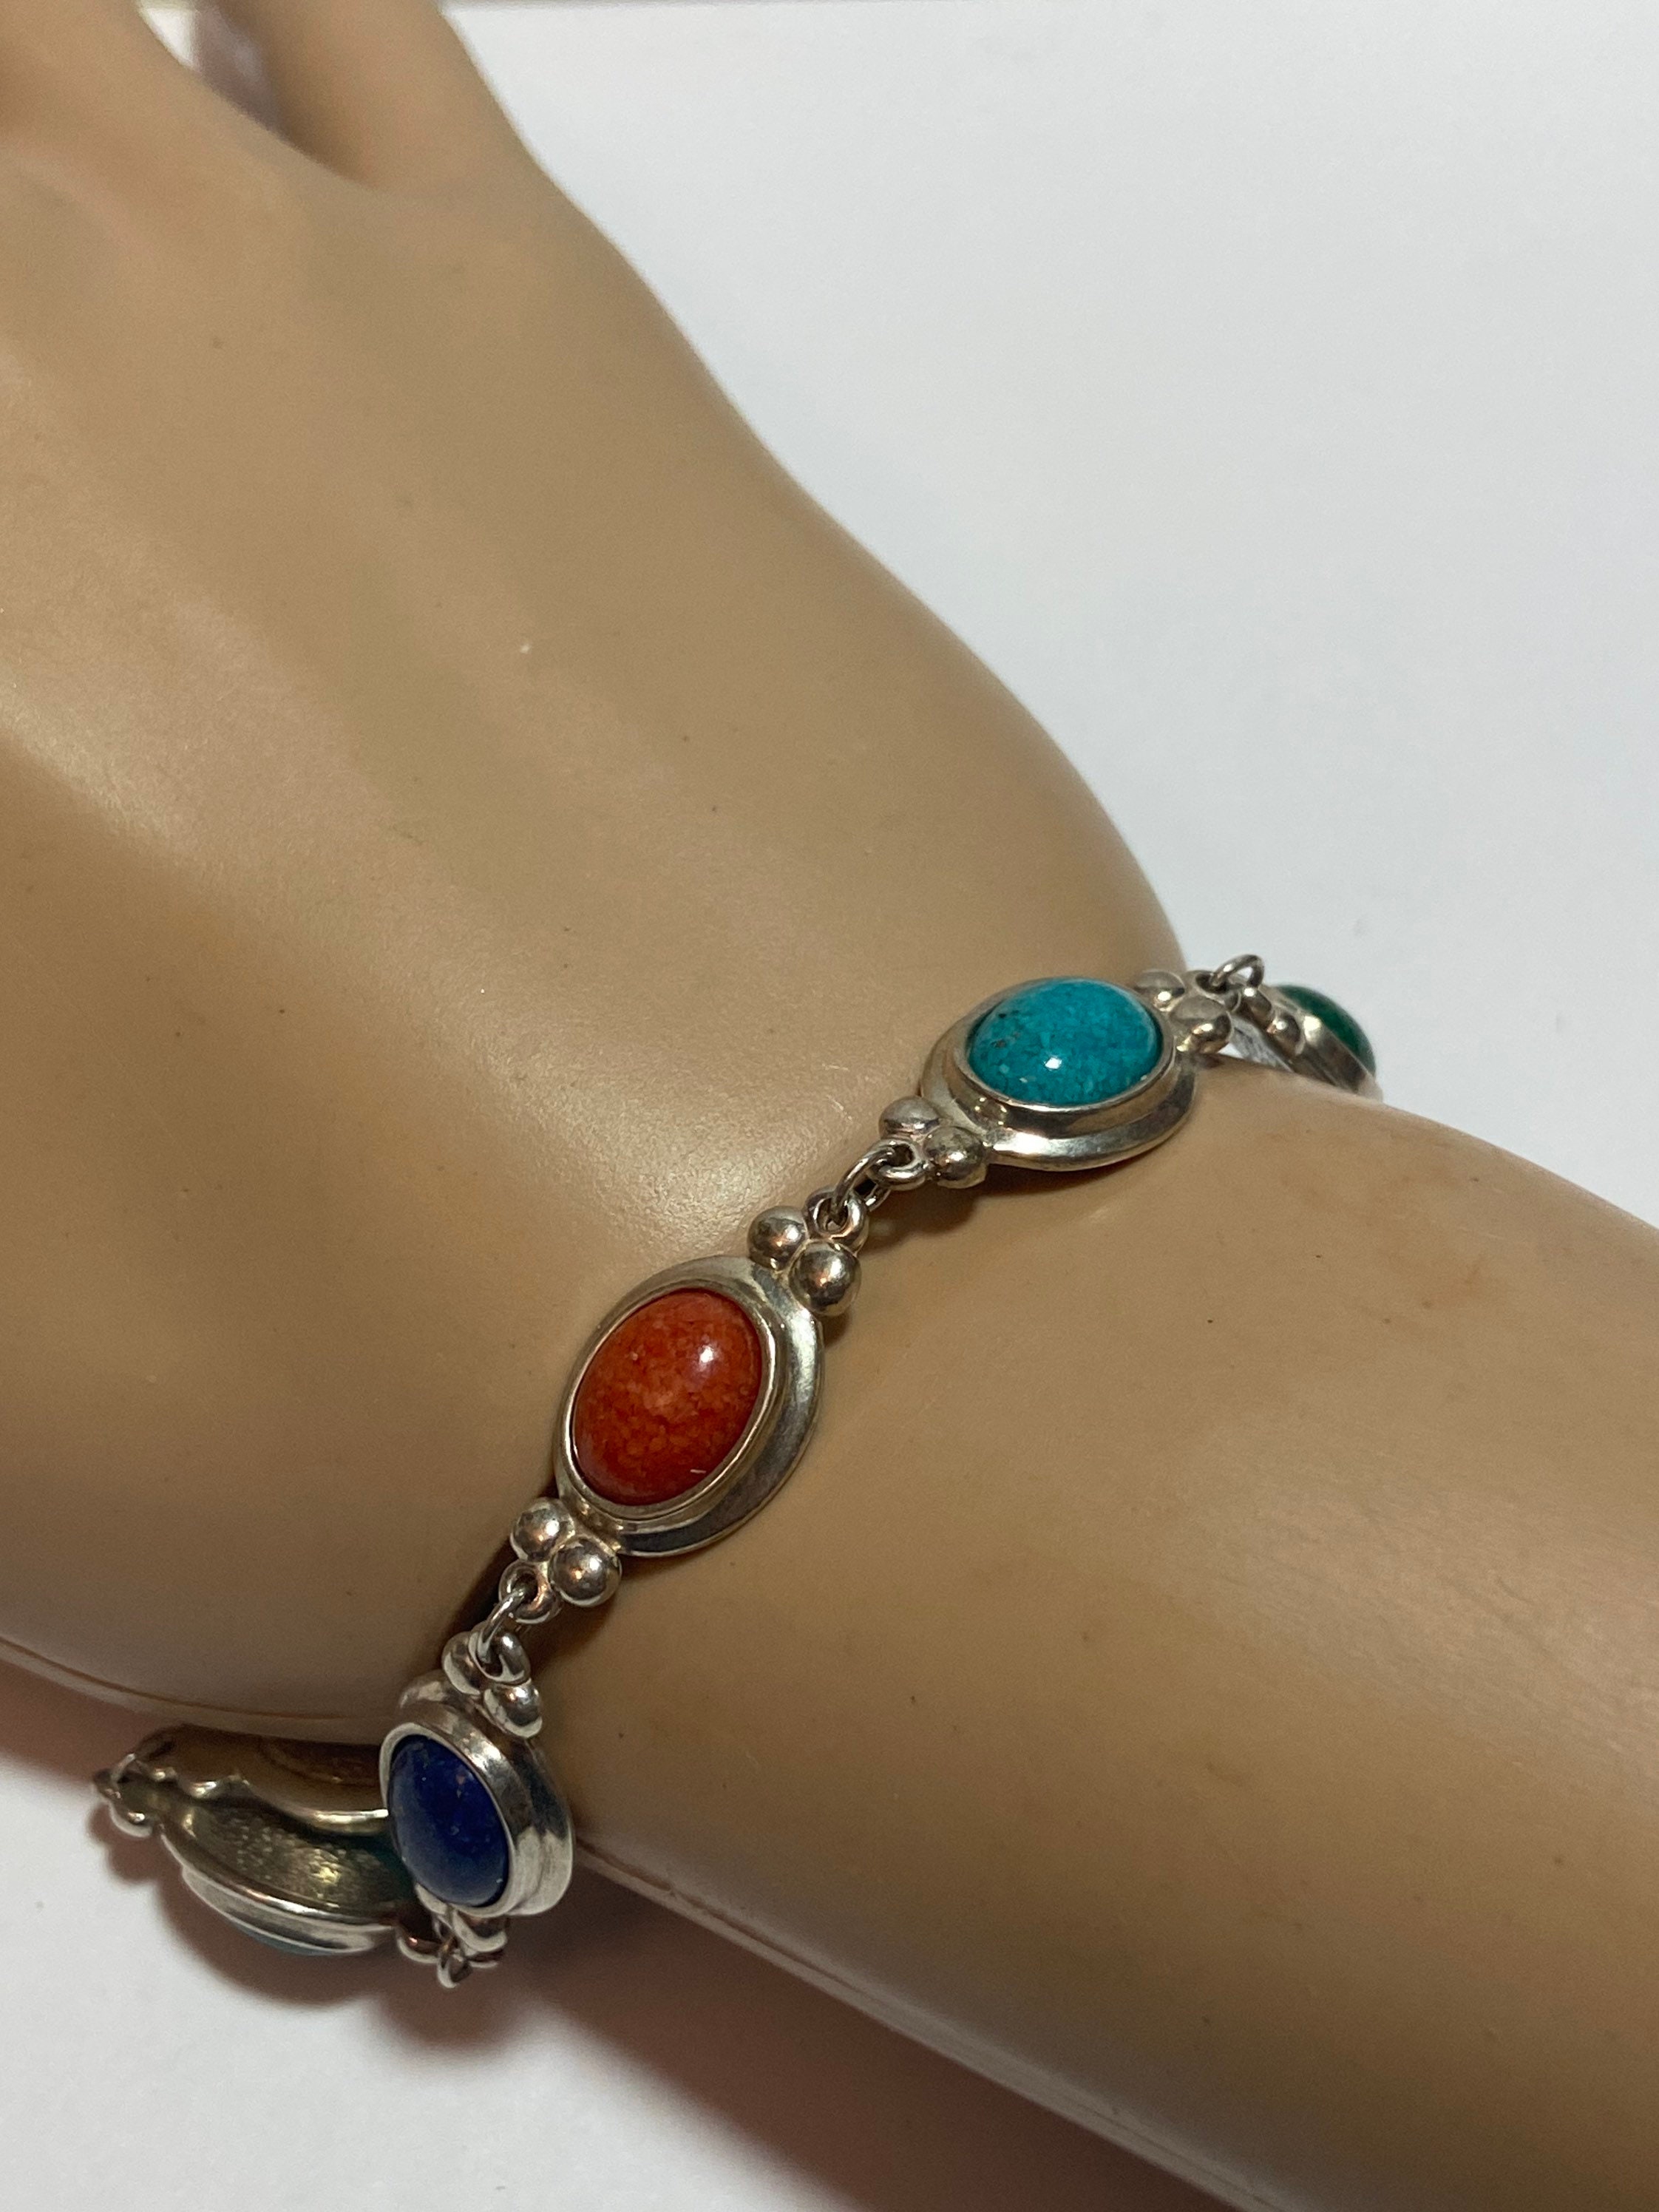 Multi Stone Sterling Bracelet 8 Black Hills Gold Coleman Turquoise Lapis  Spiny Oyster Malachite 925 Silver Vintage Jewelry Birthday Gift - Etsy